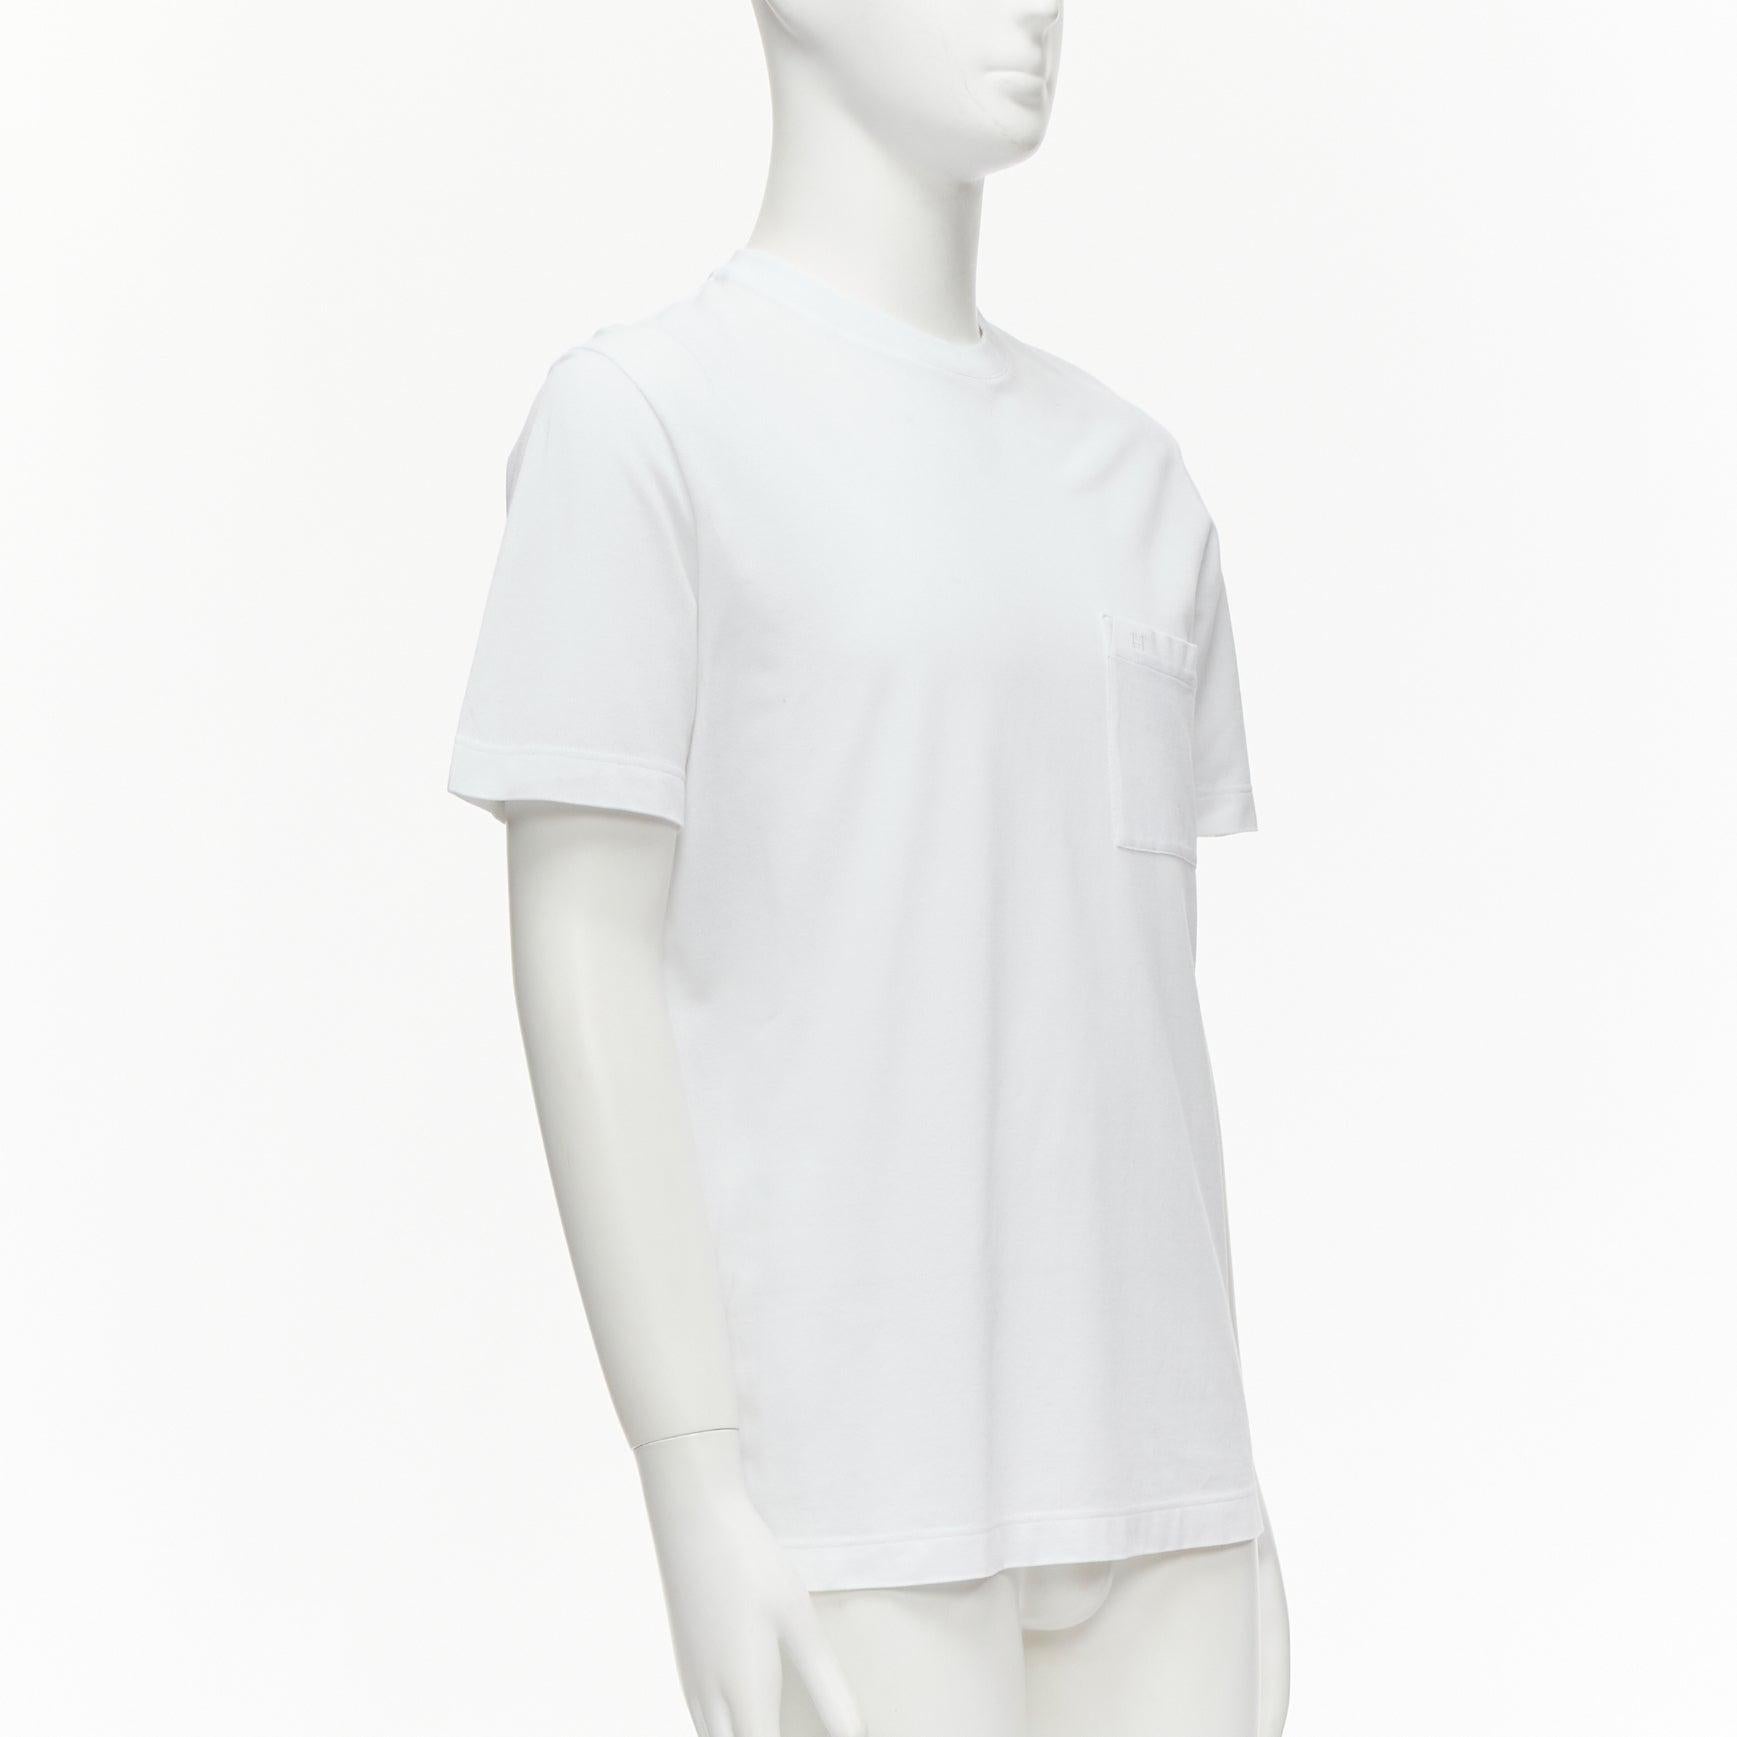 HERMES Pique H white 100% cotton logo pocket crew neck tshirt S
Reference: CNLE/A00253
Brand: Hermes
Model: Piques
Material: Cotton
Color: White
Pattern: Solid
Closure: Slip On
Extra Details: H logo at pocket. Plain back.
Made in: